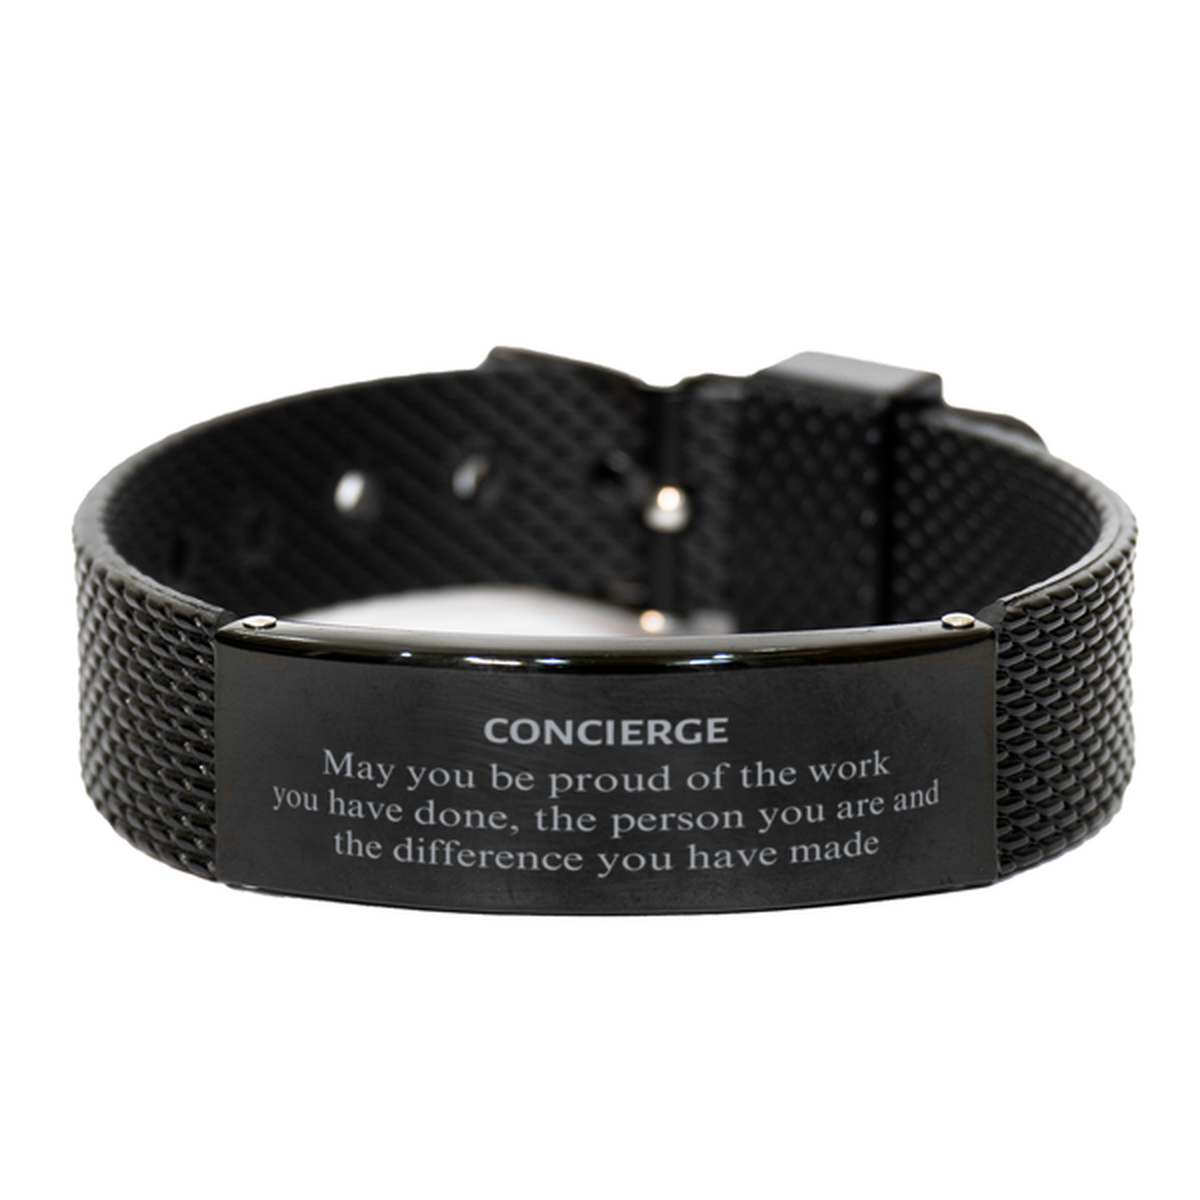 Concierge May you be proud of the work you have done, Retirement Concierge Black Shark Mesh Bracelet for Colleague Appreciation Gifts Amazing for Concierge